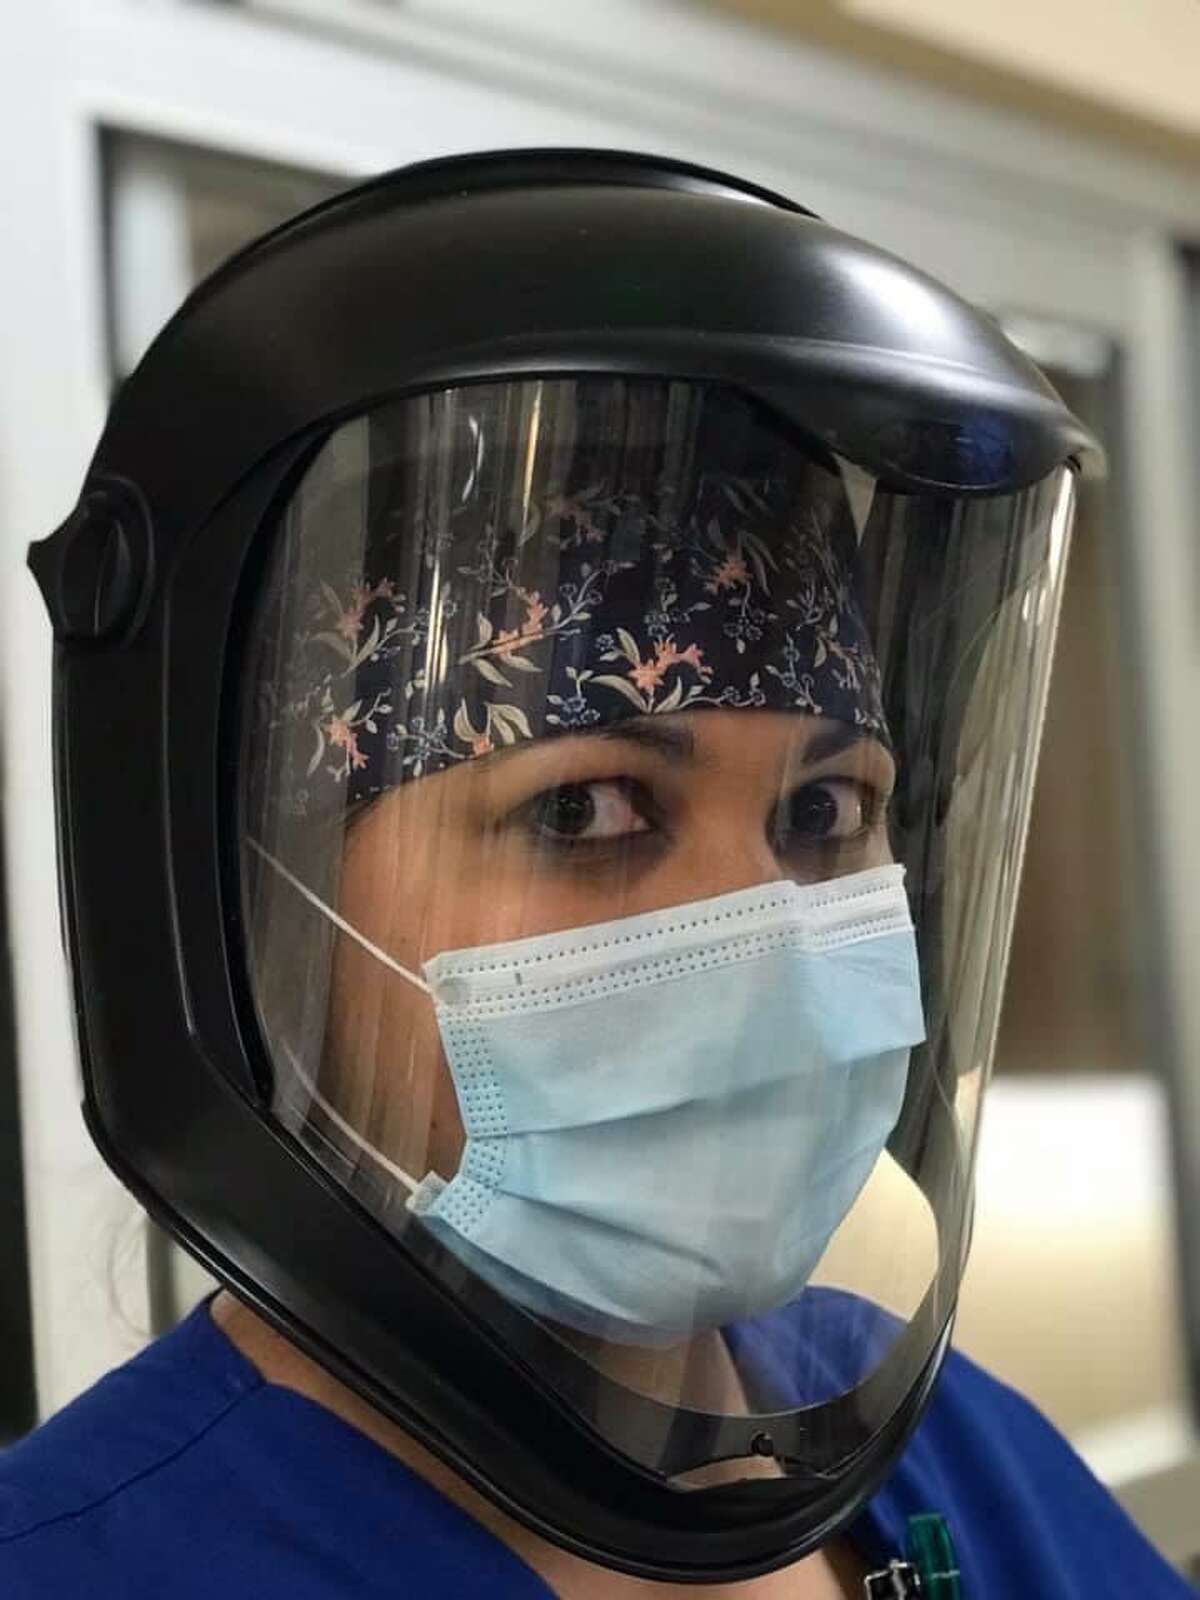 The Facebook group, Create Face Mask Covers Houston, has created more than 12,400 masks, caps and face shields for those on the front lines of COVID-19. Here, a health care worker wears a surgeon cap that makes wearing a face shield more comfortable.